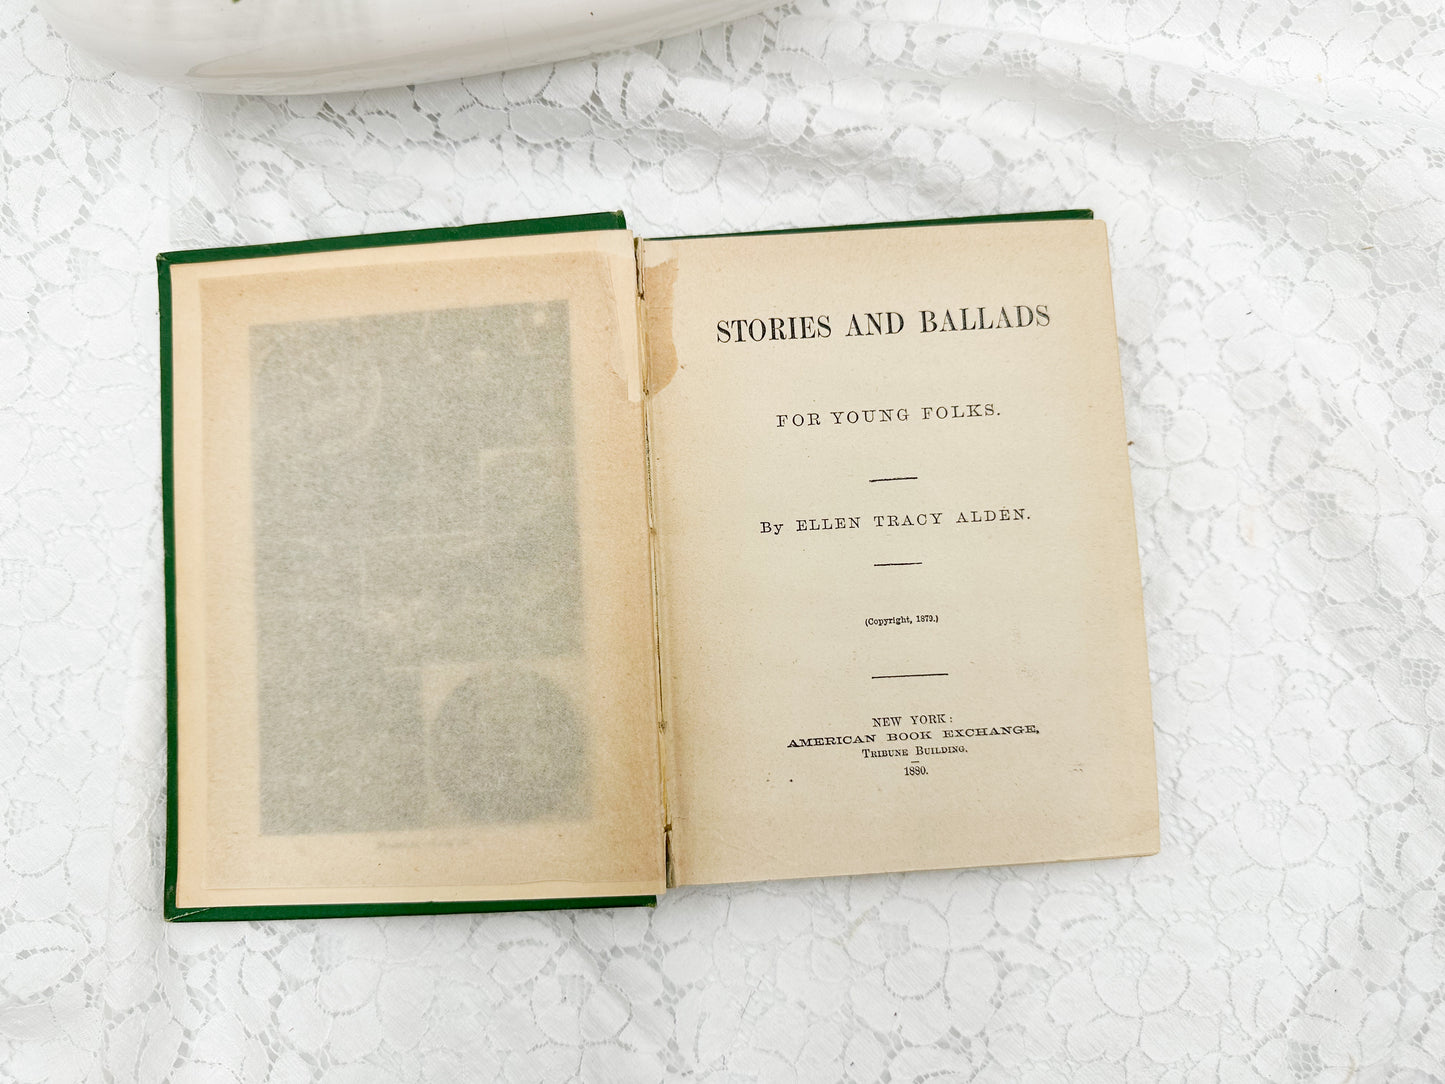 Stories and Ballads, 1880